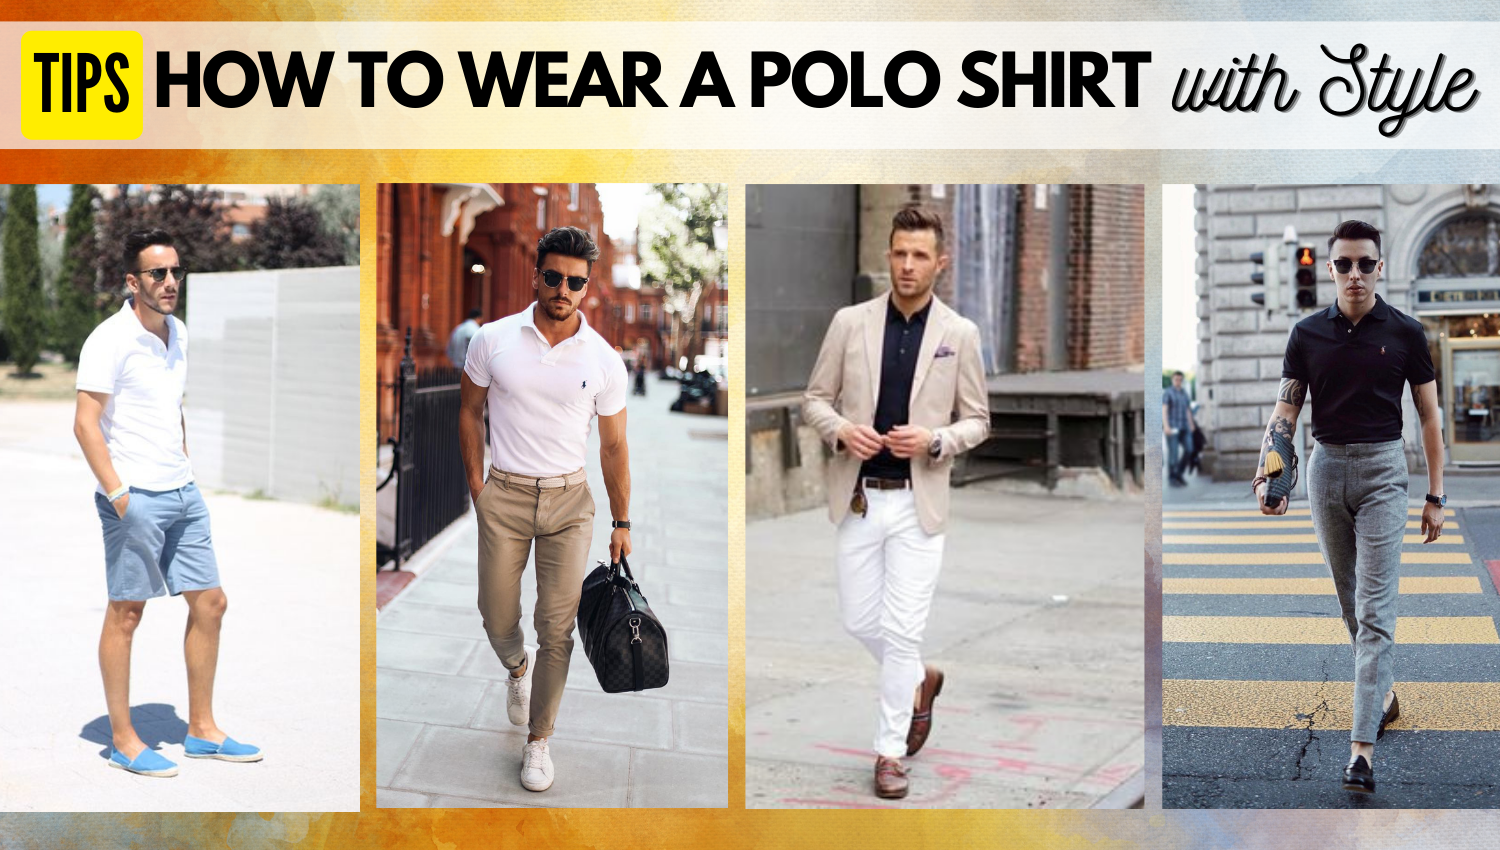 Tips: How to Wear a Polo Shirt with Style